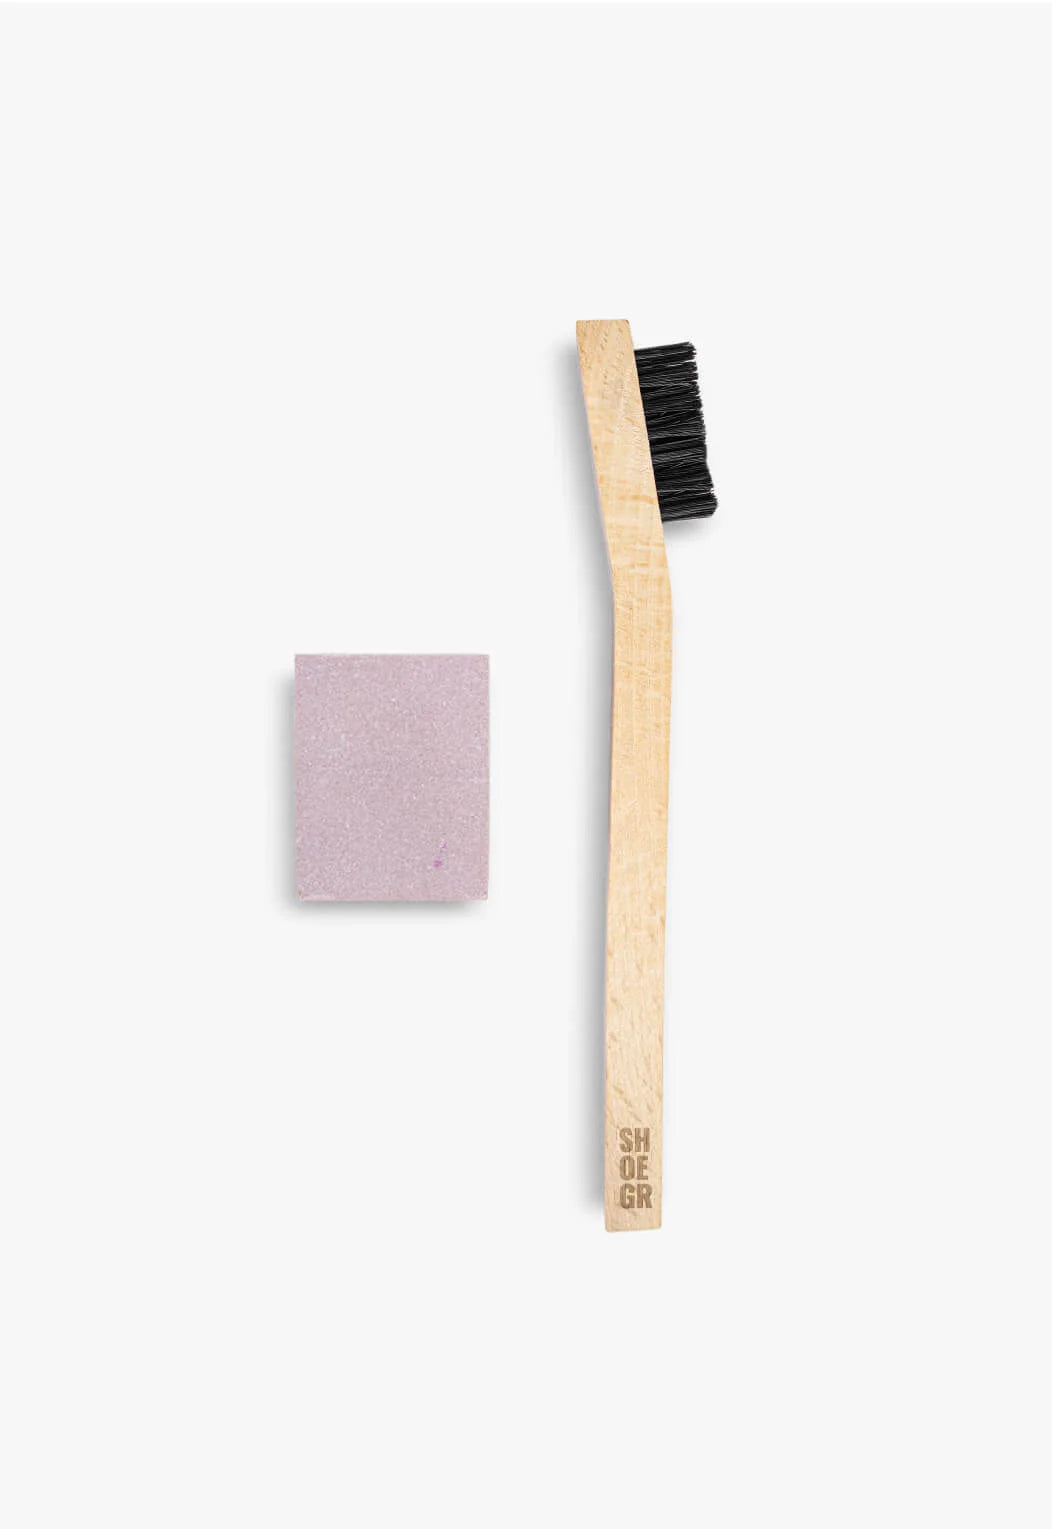 Dry Suede Cleaning Kit